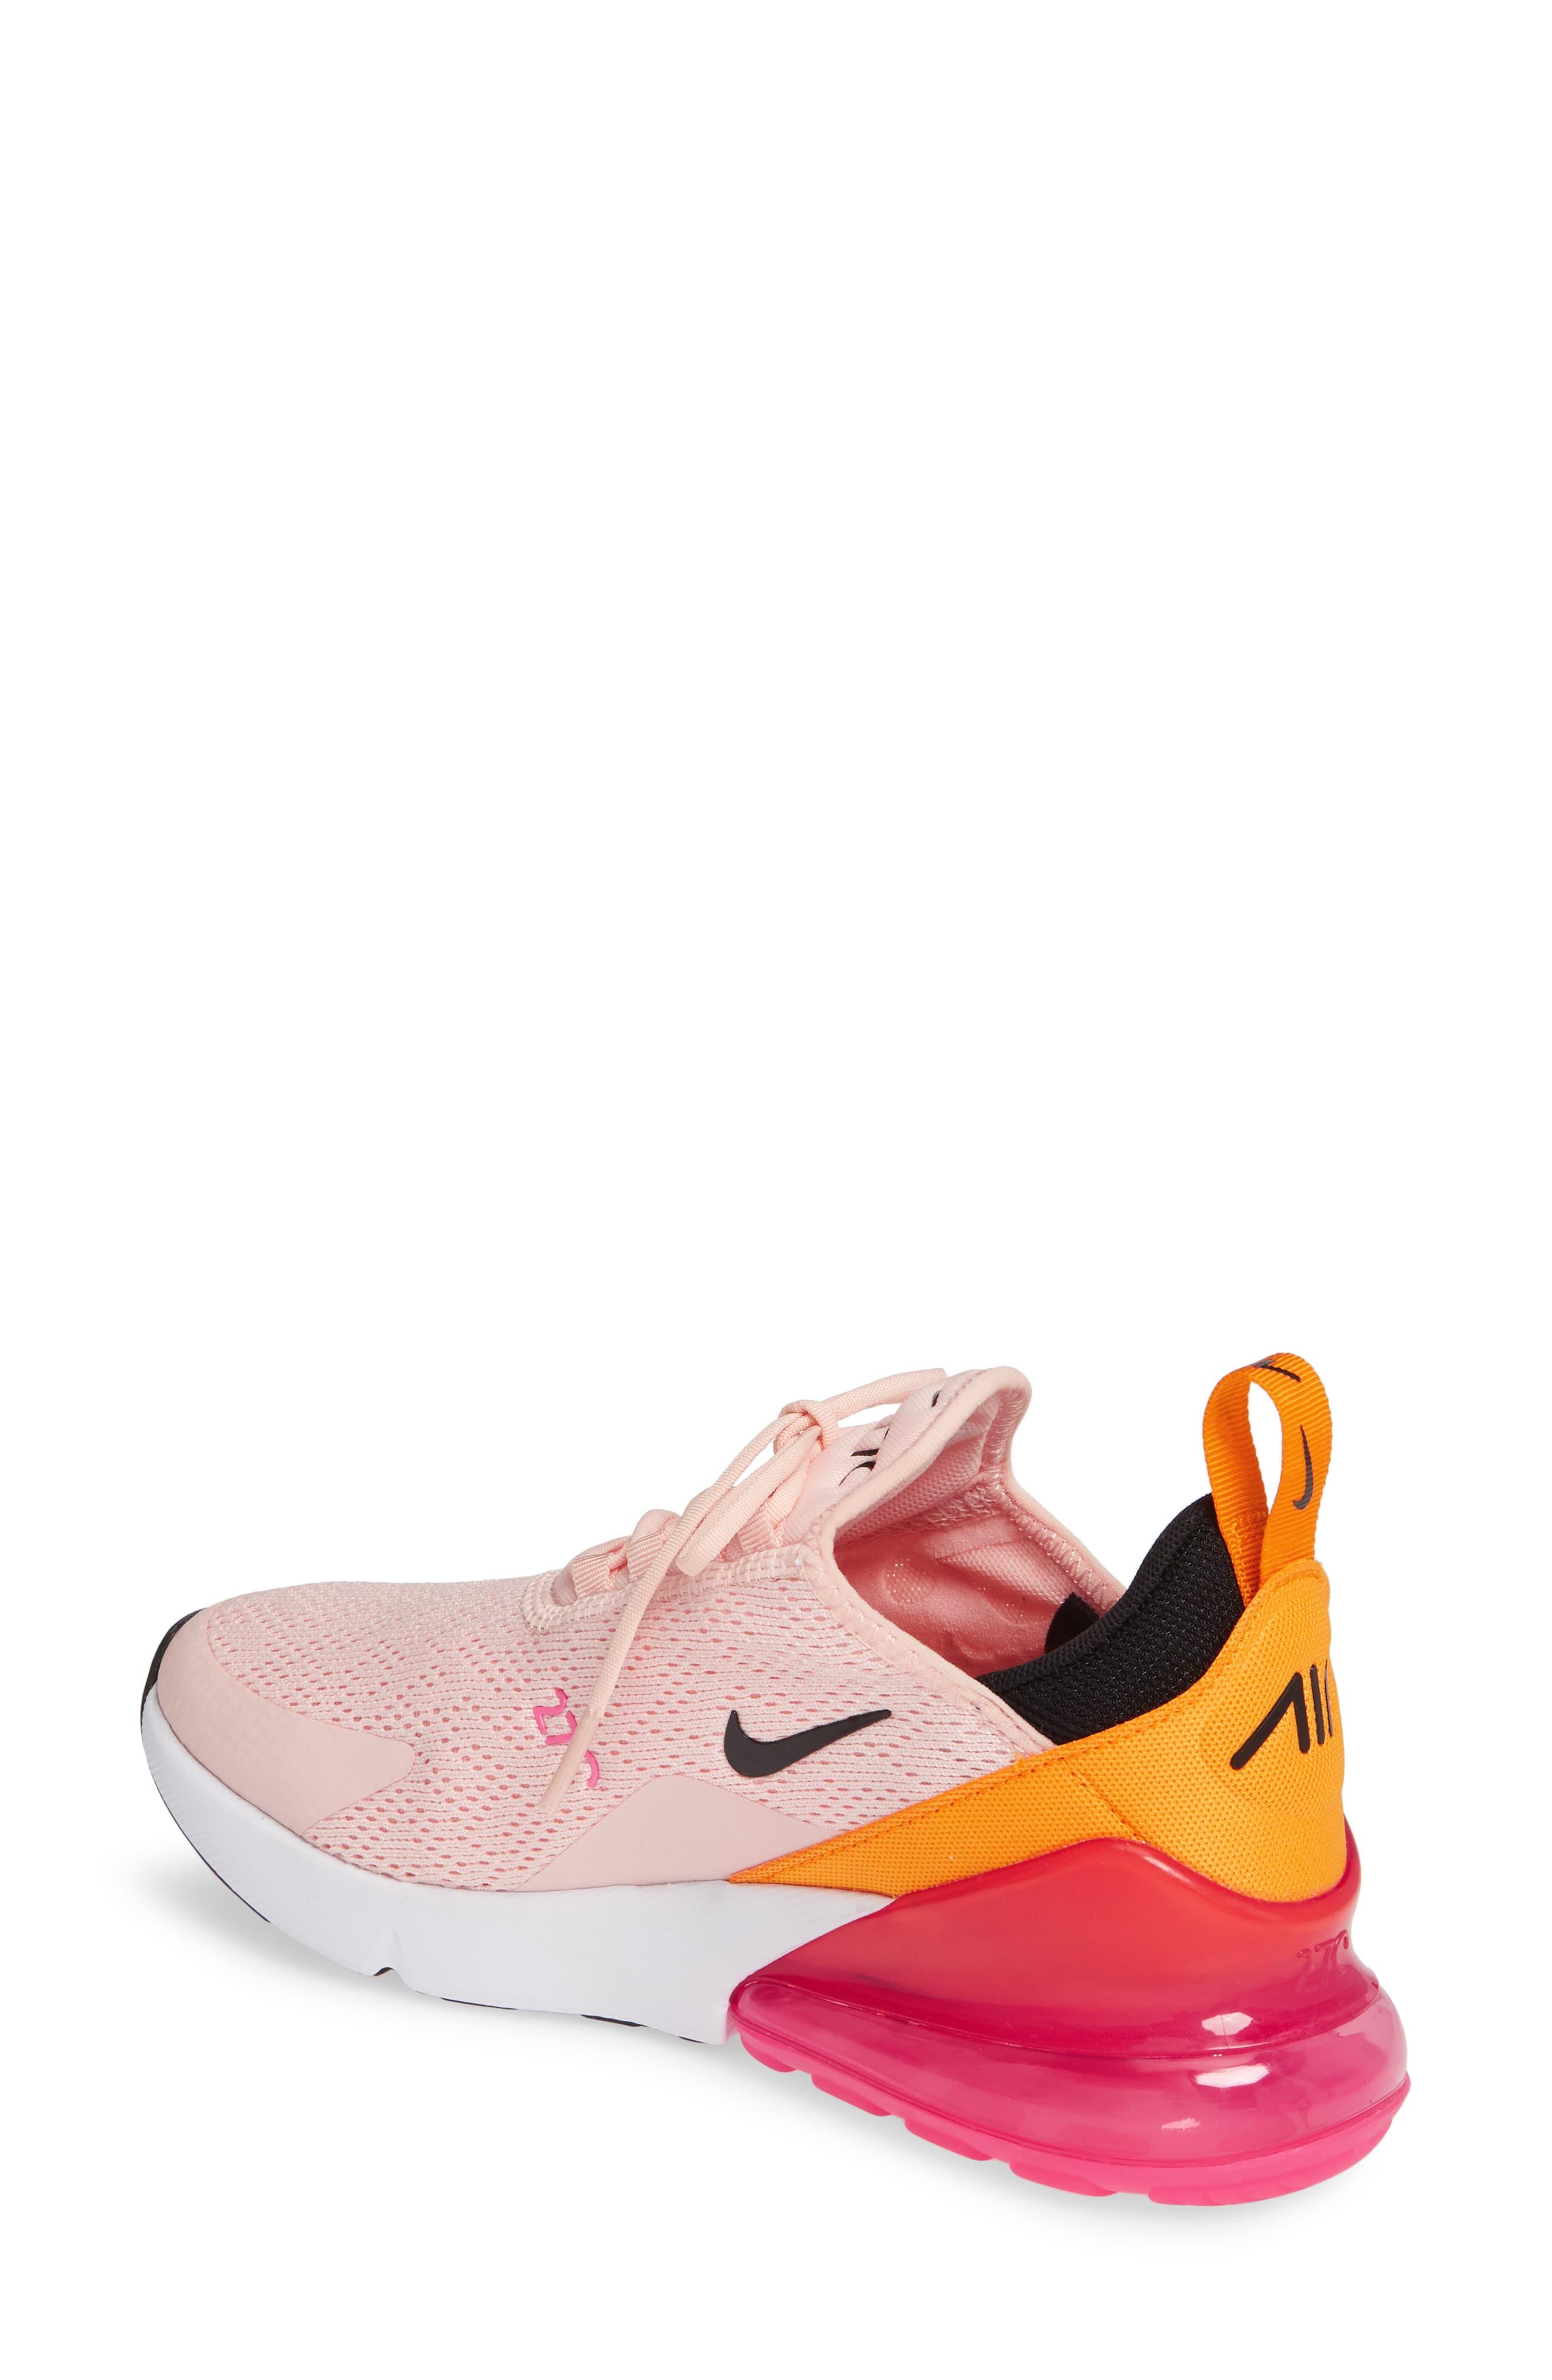 Nike Air Max 270 Premium Sneaker In Washed Coral Black Fuchsia Pink Lyst